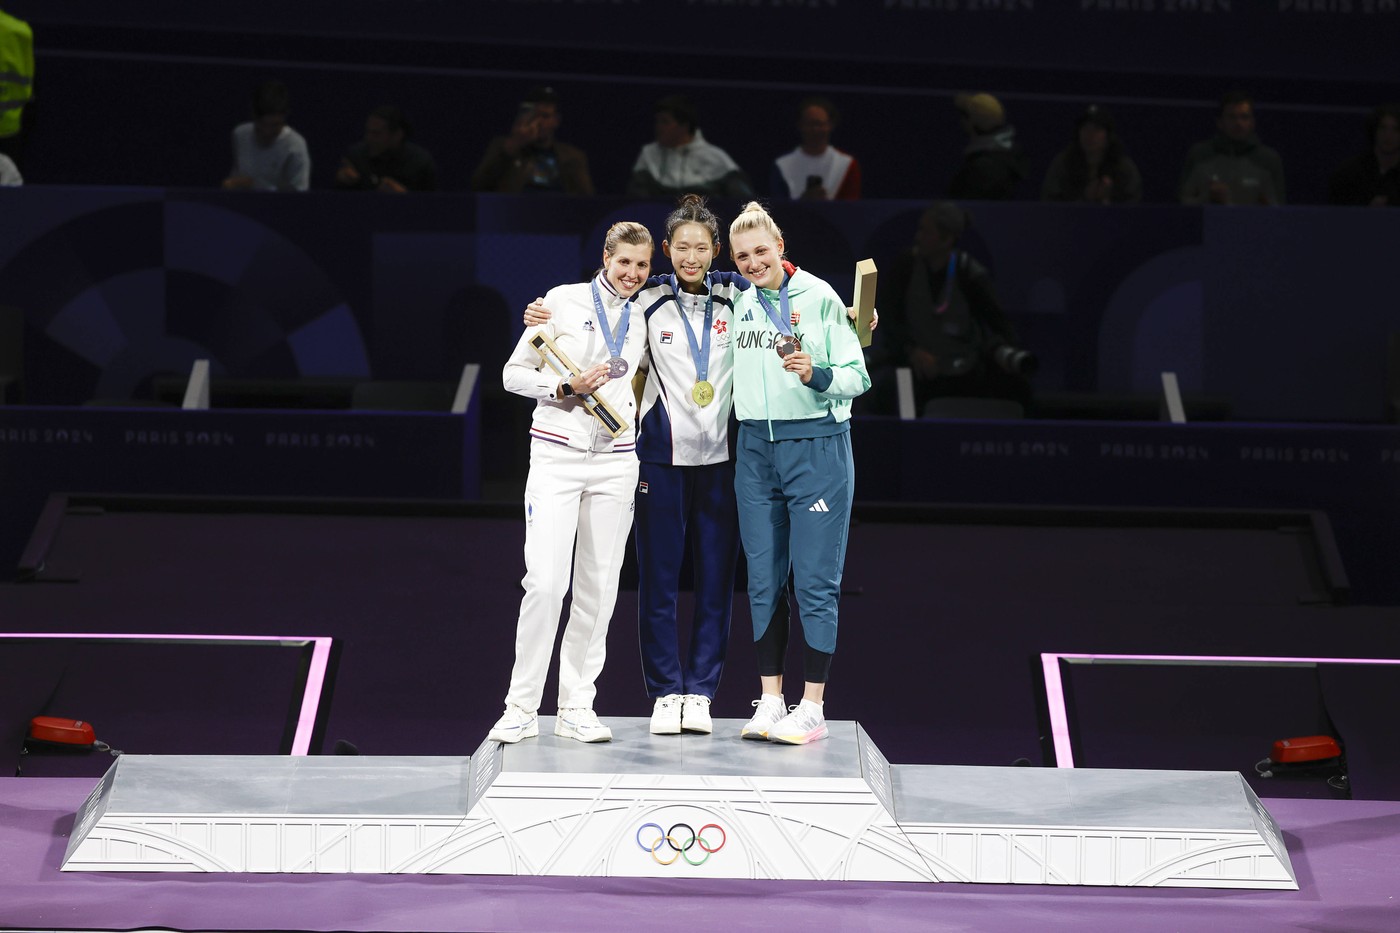 MALLO-BRETON Auriane of France, KONG Man Wai Vivian of Hong Kong, China, MUHARI Eszter of Hungary, Women s Ă‰pĂ©e Individual Fencing, podium, during the Olympic Games, Olympische Spiele, Olympia, OS Paris 2024 on 27 July 2024 at Le Grand Palais in Paris, France - Photo Gregory Lenormand / DPPI Media / Panoramic OLYMPIC GAMES PARIS 2024 - 27/07 DPPI/Panoramic 21024004_GRL_6409,Image: 893226869, License: Rights-managed, Restrictions: PUBLICATIONxNOTxINxFRAxBEL, Credit images as 